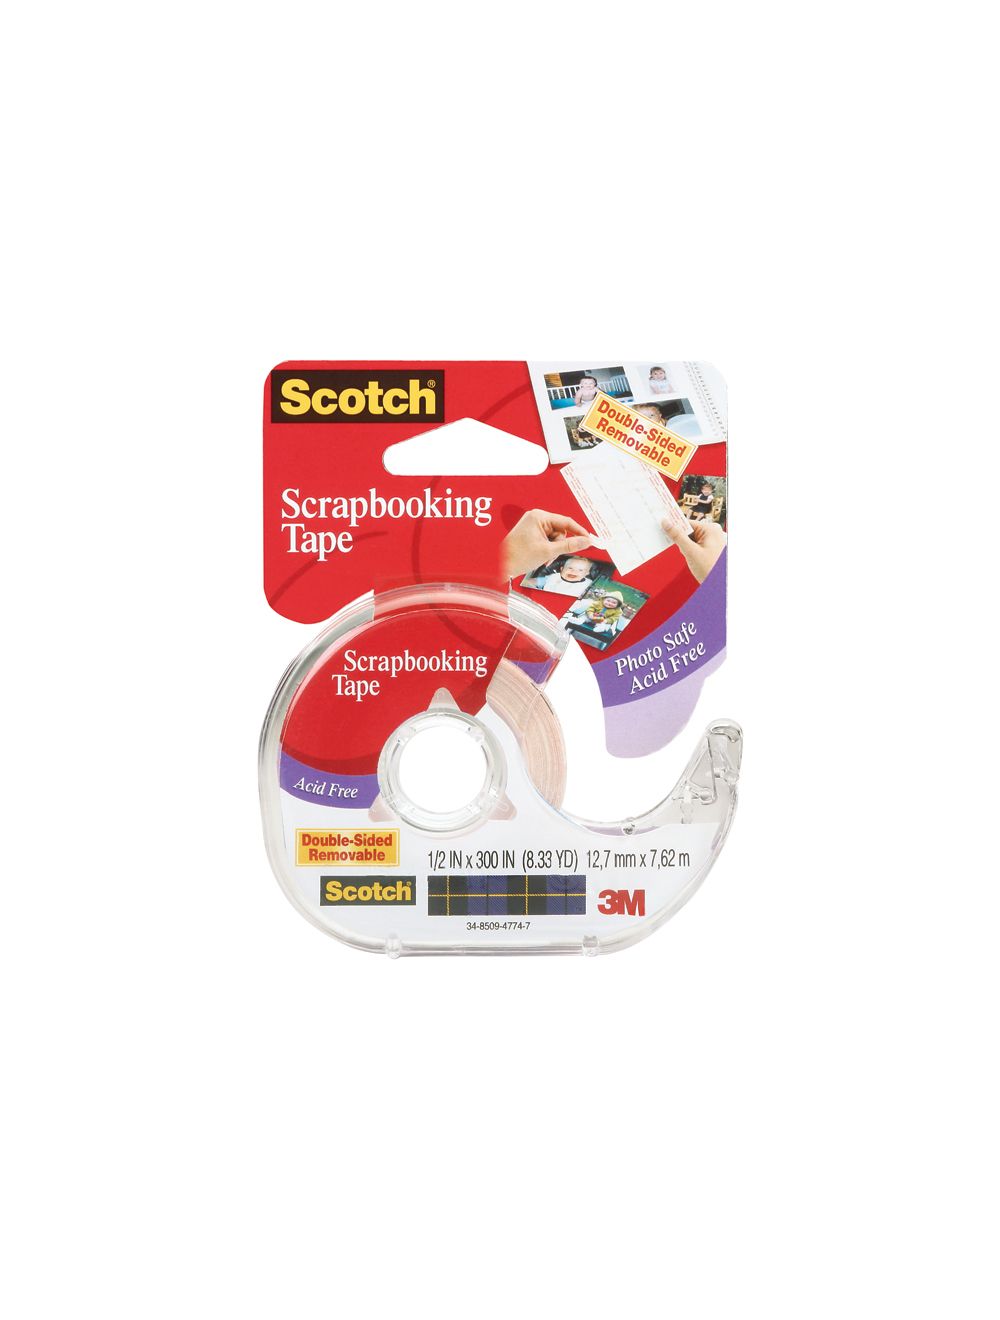 Scotch Scrapbooking Tape Double-Sided Removable-.5X300 (NM01249634)